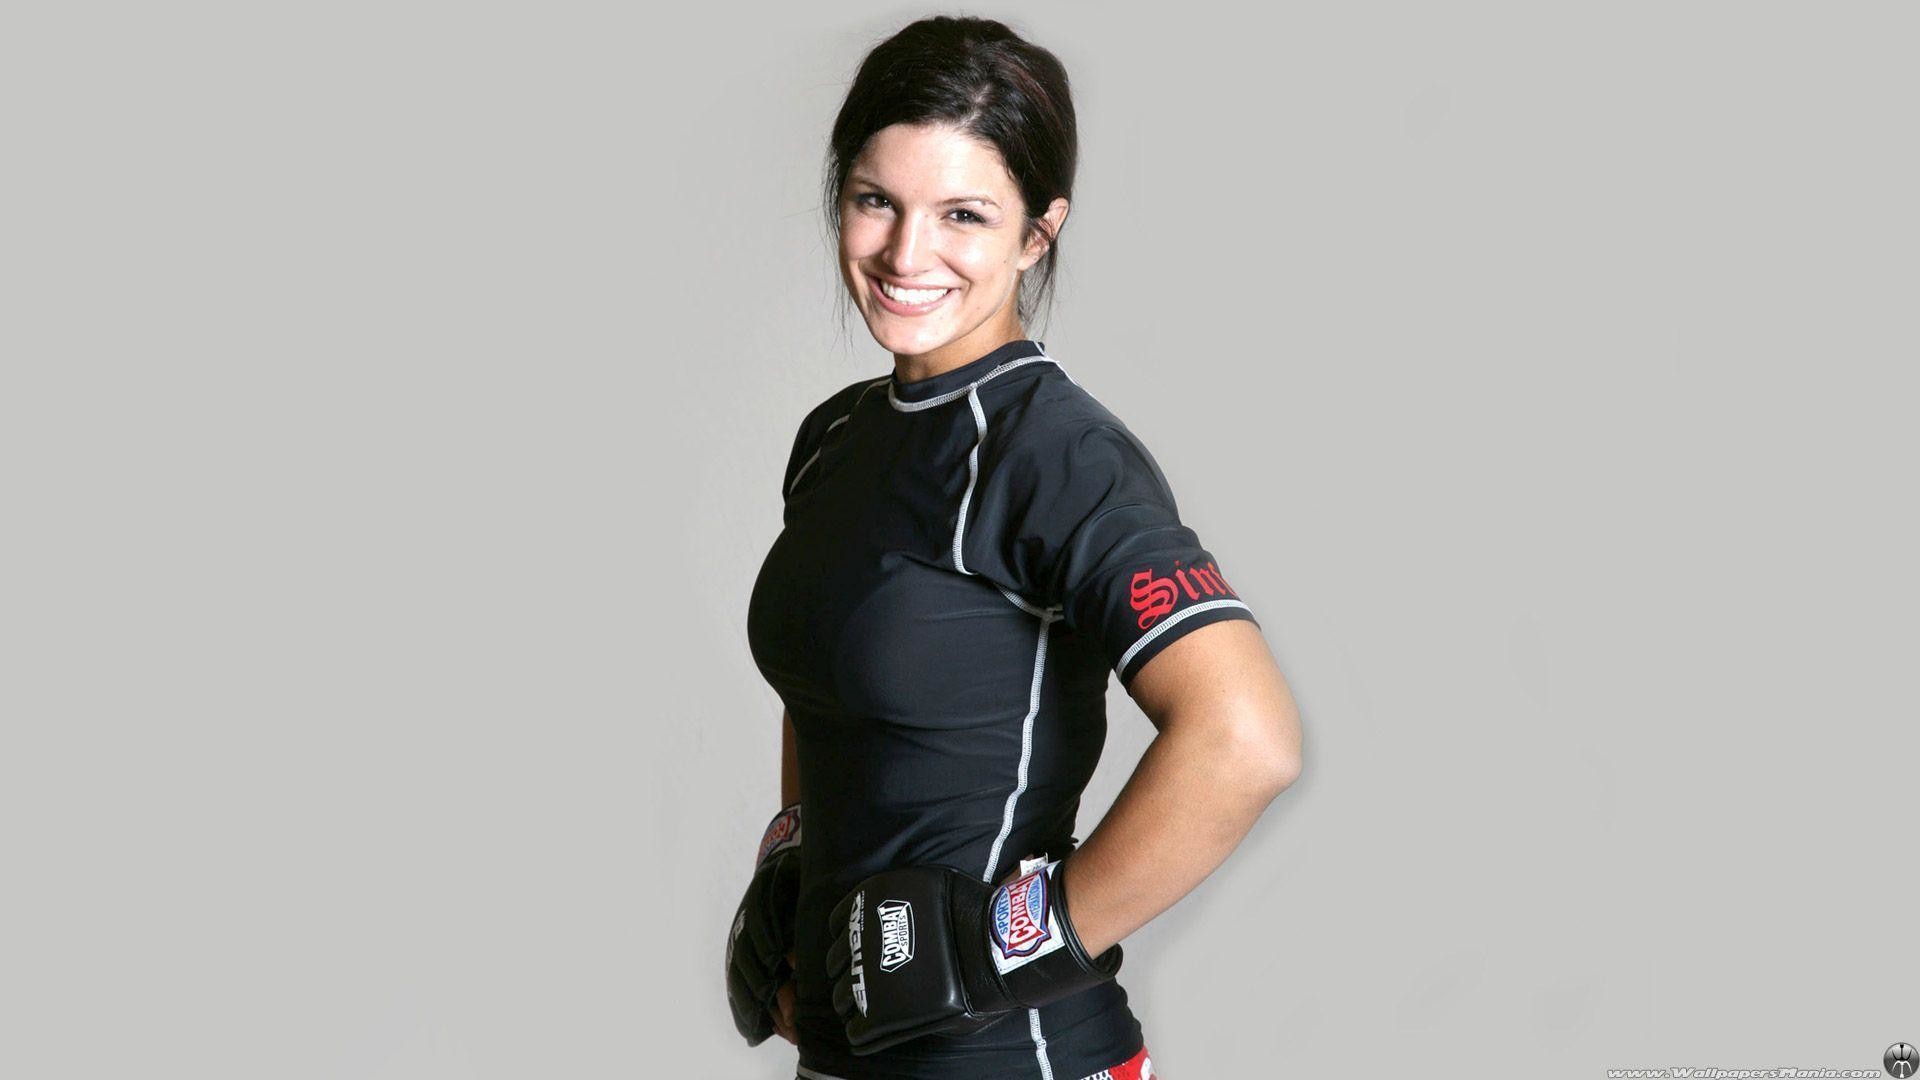 1920x1080 Collection of Gina Carano HD Wallpapers in Hot Gallery & Facts